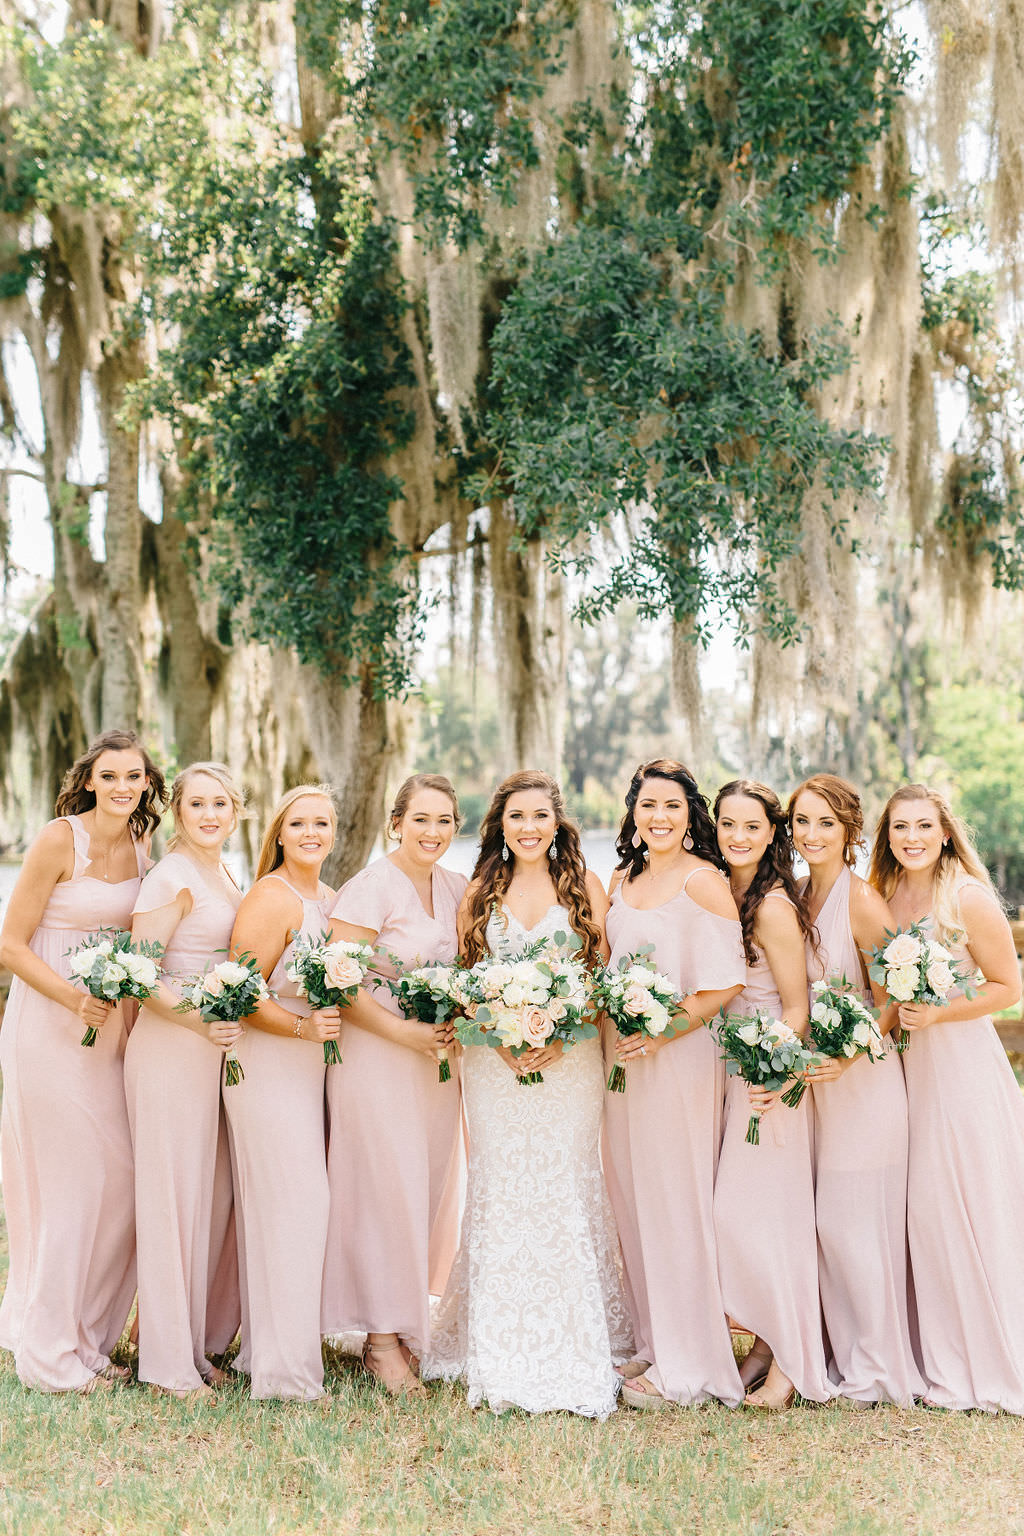 Tampa Bay Bride and Bridesmaids Under Mossy Oak Tree, Bridesmaids in Mix and Match Blush Pink Show Me Your MuMu Long Dresses, Holding Whimsical Ivory and Pink Floral Bouquets with Greenery | Plant City Outdoor Wedding Venue Florida Rustic Barn Weddings